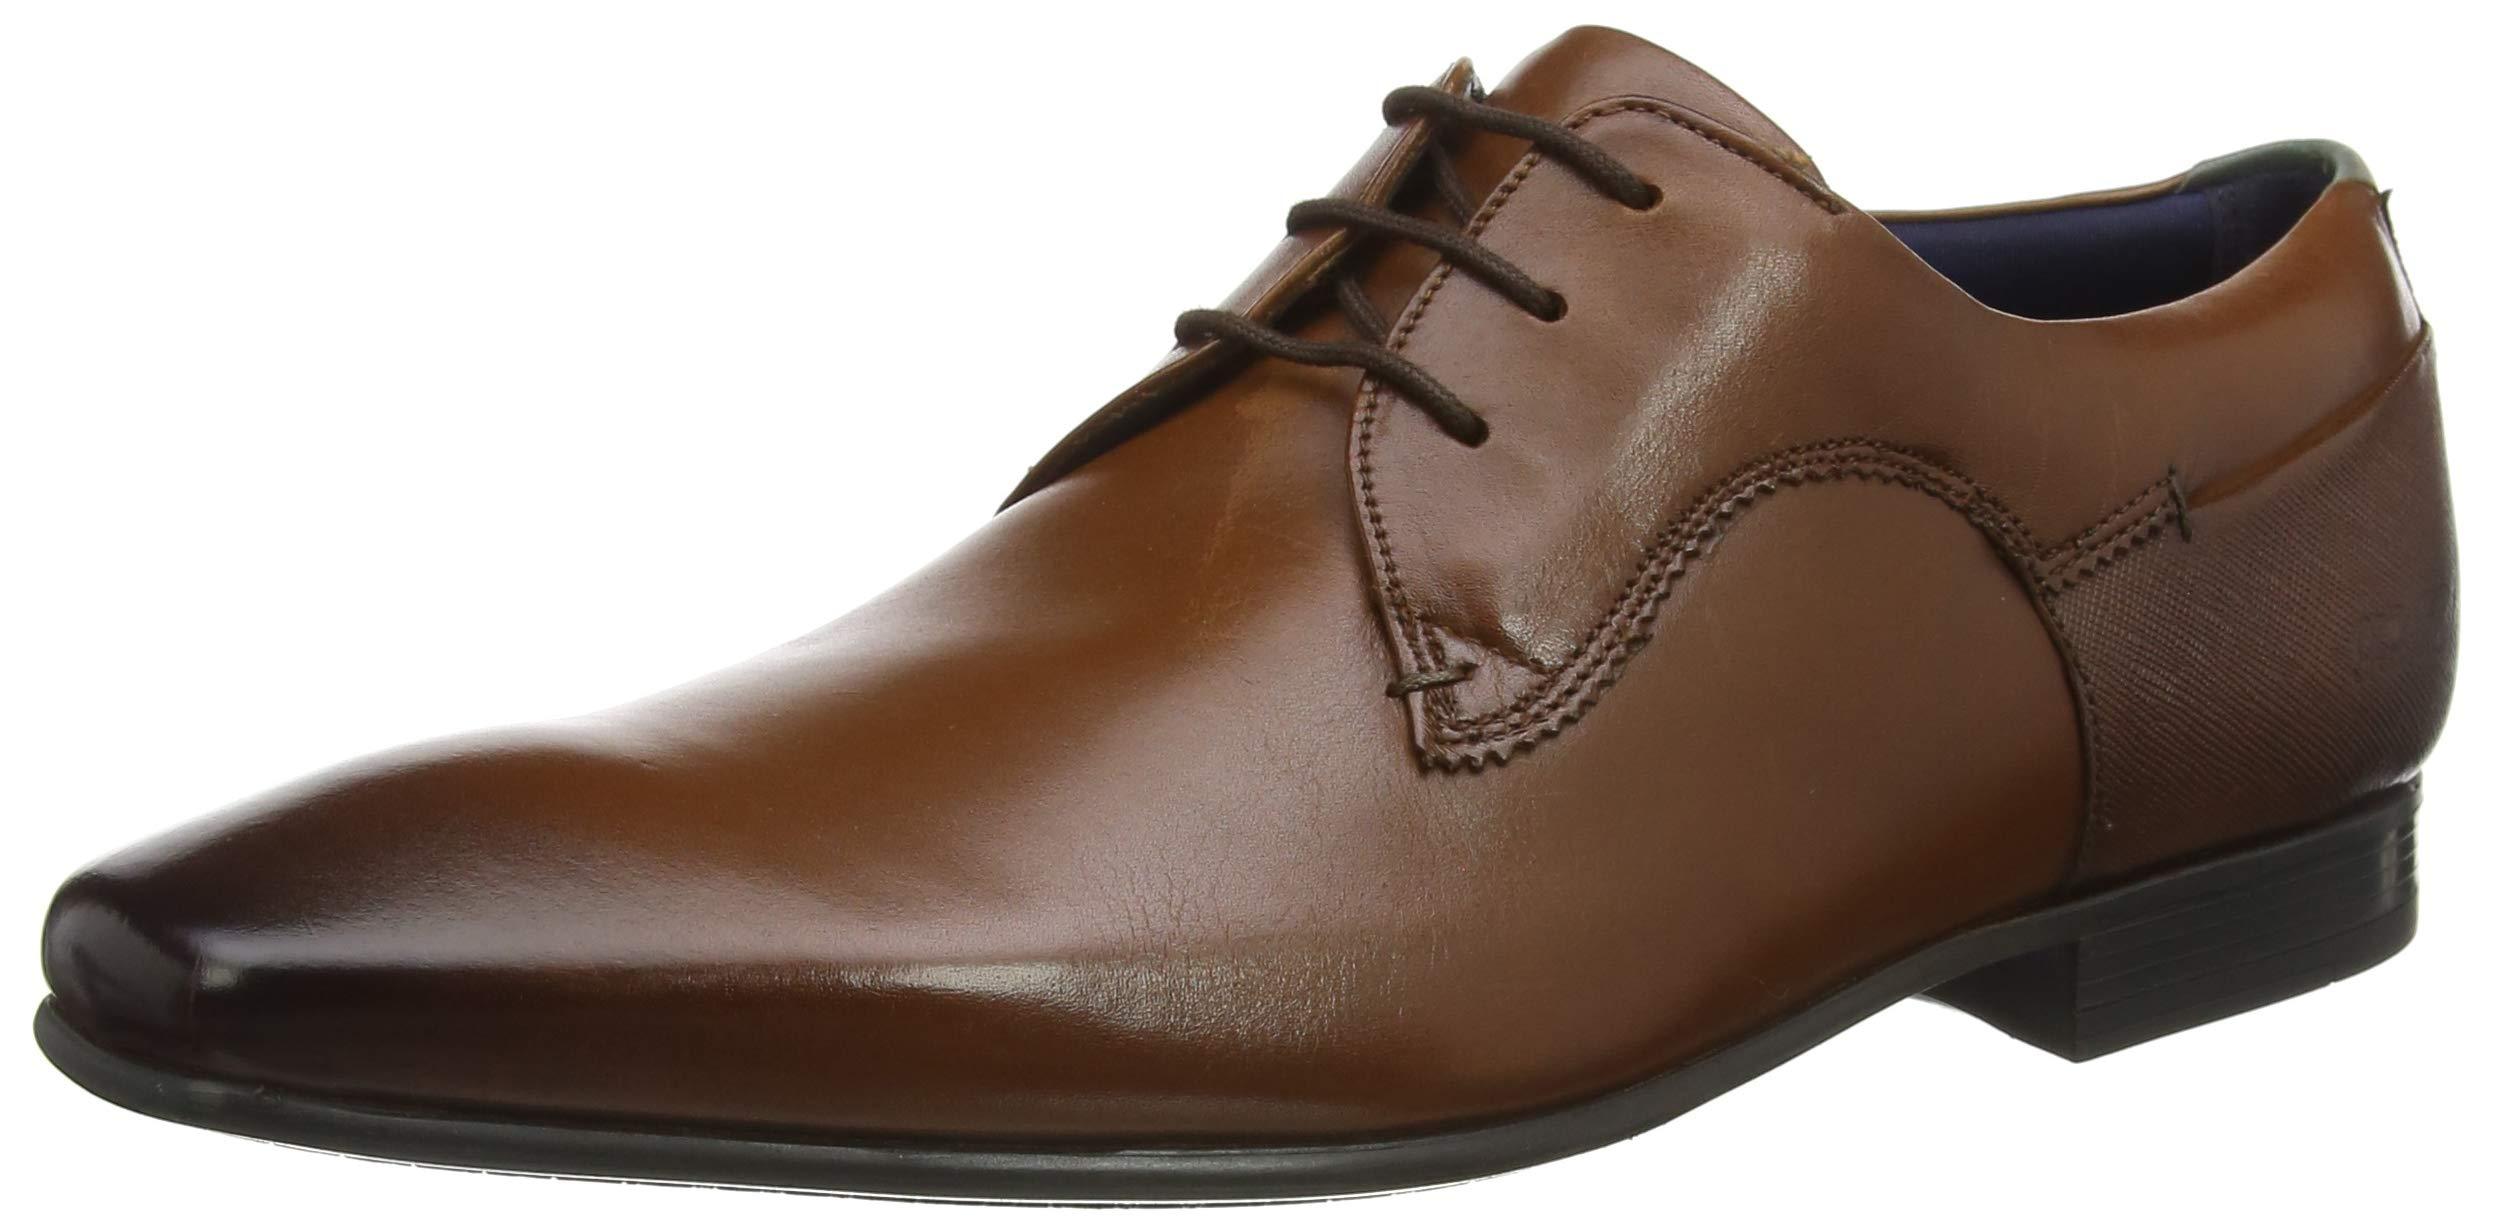 for Men Brown Mens Shoes Lace-ups Oxford shoes Ted Baker Trifp Oxford in Brown Tan Save 40% 